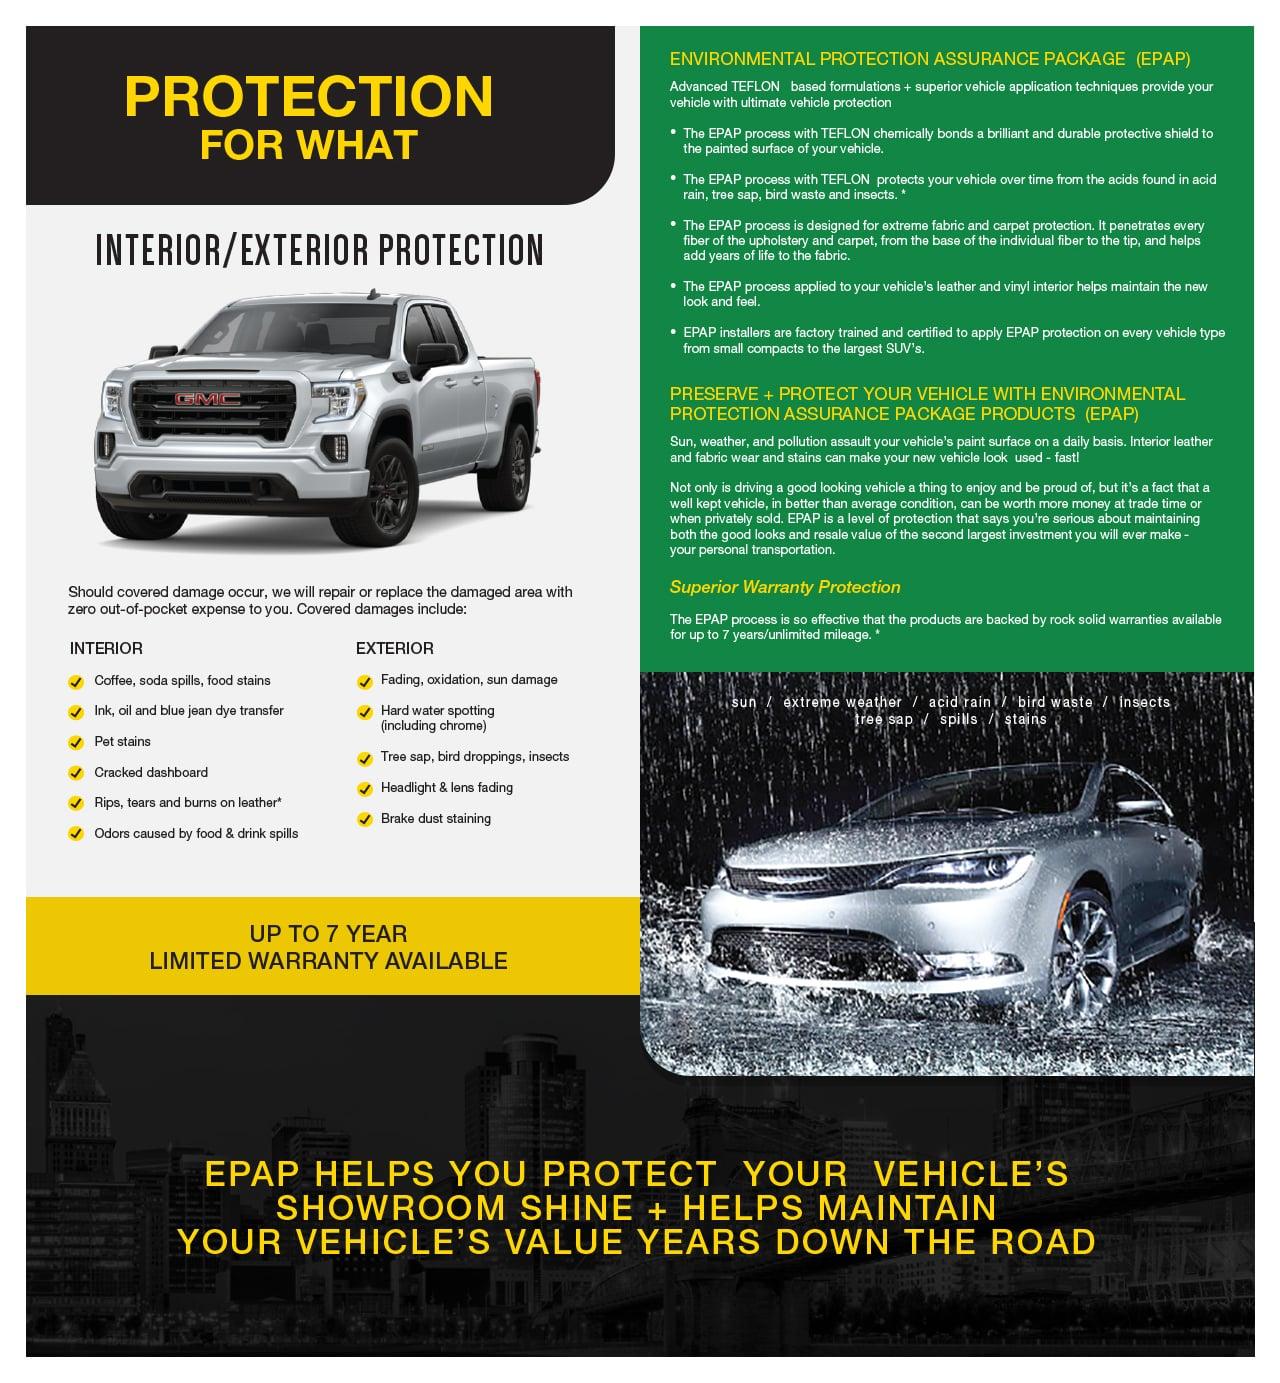 Protection for what? Interior/Exterior protection. Should covered damage occur, we will repair or replace the damaged area with  zero out-of-pocket expense to you. Covered damages include: INTERIOR Coffee, soda spills, food stains, Ink, oil and blue jean dye transfer, Pet stains, Cracked dashboard, Rips, tears and burns on leather*, Odors caused by food & drink spills. EXTERIOR Fading, oxidation, sun damage, Hard water spotting (including chrome), Tree sap, bird droppings, insects, Headlight & lens fading, Brake dust staining. Up to a 7 year limited warranty available. ENVIRONMENTAL PROTECTION ASSURANCE PACKAGE  (EPAP)   Advanced TEFLON   based formulations + superior vehicle application techniques provide your  vehicle with ultimate vehicle protection   •The EPAP process with TEFLON chemically bonds a brilliant and durable protective shield to  the painted surface of your vehicle. •The EPAP process with TEFLON  protects your vehicle over time from the acids found in acid  rain, tree sap, bird waste and insects. * •The EPAP process is designed for extreme fabric and carpet protection. It penetrates every  fiber of the upholstery and carpet, from the base of the individual fiber to the tip, and helps  add years of life to the fabric. •The EPAP process applied to your vehicle’s leather and vinyl interior helps maintain the new  look and feel. •EPAP installers are factory trained and certified to apply EPAP protection on every vehicle type  from small compacts to the largest SUV’s.  PRESERVE + PROTECT YOUR VEHICLE WITH ENVIRONMENTAL PROTECTION ASSURANCE PACKAGE PRODUCTS  (EPAP)   Sun, weather, and pollution assault your vehicle’s paint surface on a daily basis. Interior leather  and fabric wear and stains can make your new vehicle look  used - fast!  Not only is driving a good looking vehicle a thing to enjoy and be proud of, but it’s a fact that a  well kept vehicle, in better than average condition, can be worth more money at trade time or  when privately sold. EPAP is a level of protection that says you’re serious about maintaining  both the good looks and resale value of the second largest investment you will ever make -  your personal transportation.  Superior Warranty Protection  The EPAP process is so effective that the products are backed by rock solid warranties available  for up to 7 years/unlimited mileage. * EPAP helps you protect your vehicle's showroom shine + helps maintain your vehicle's value years down the road. 